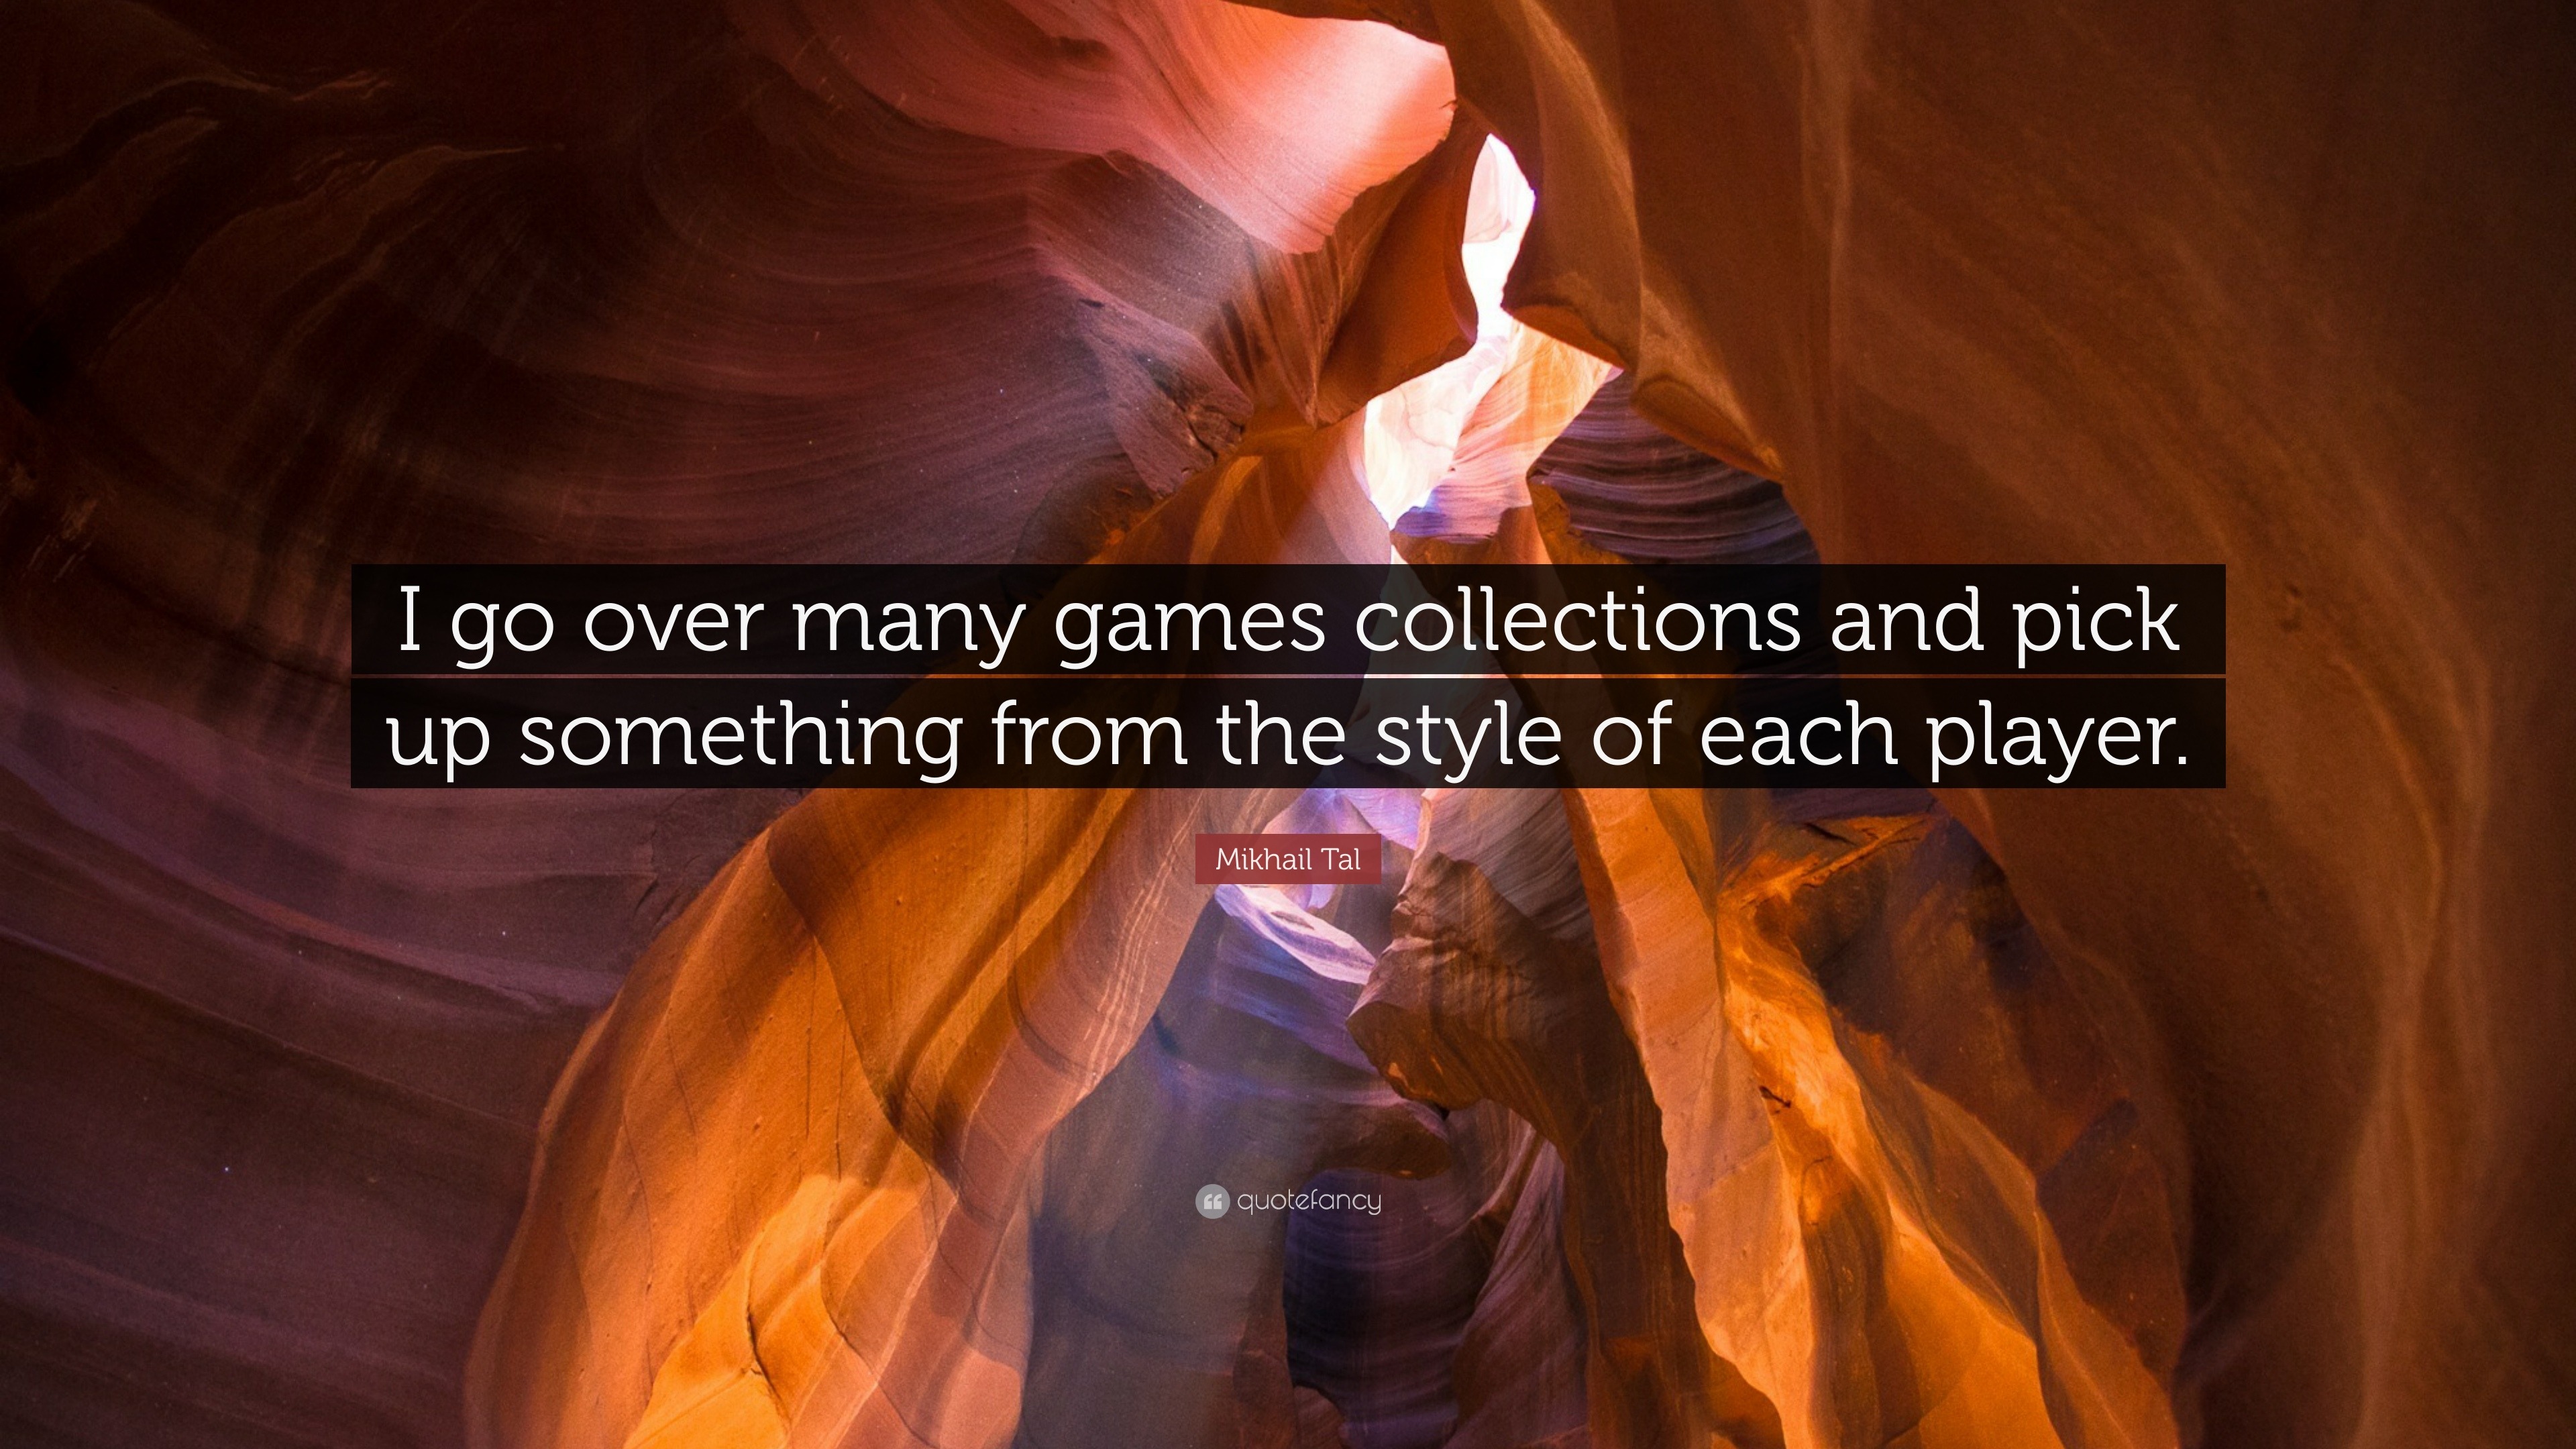 Mikhail Tal Quote: “I go over many games collections and pick up something  from the style